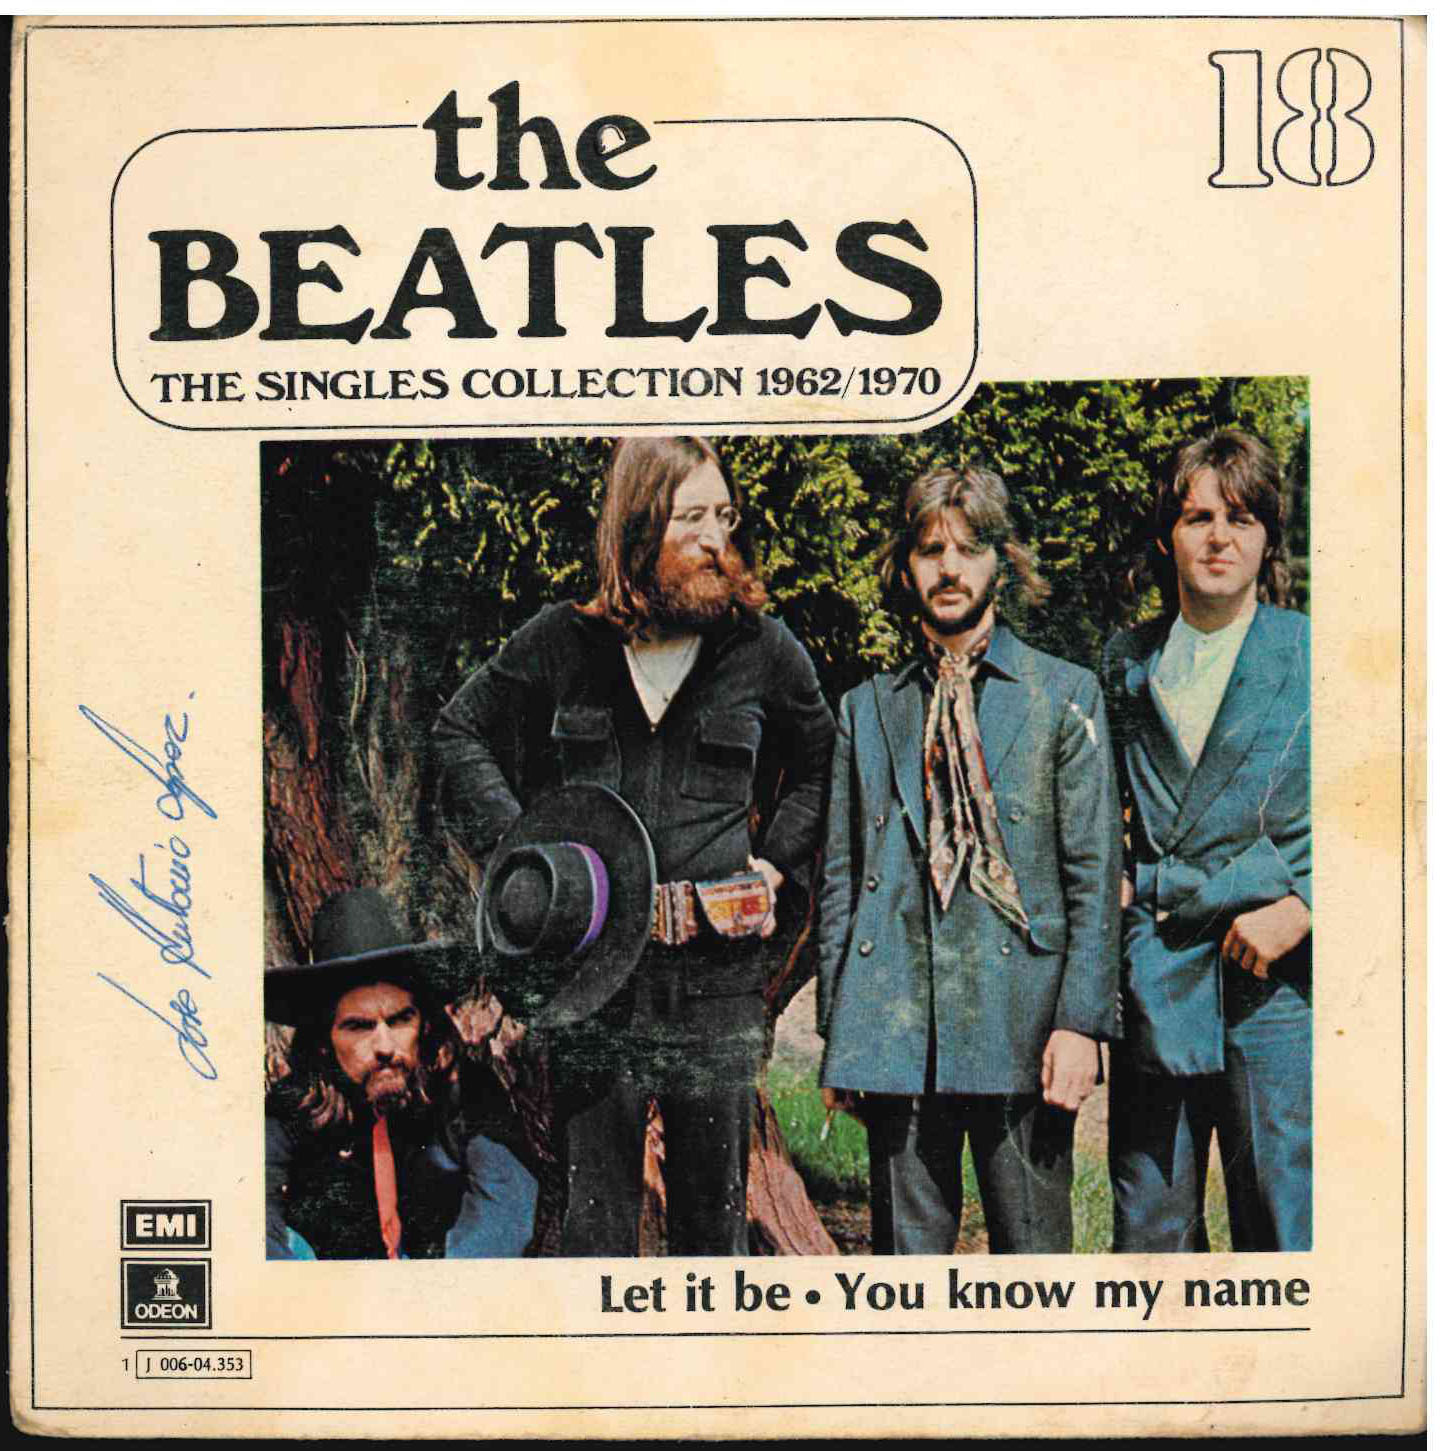 The Beatles. The singles collection 1962/1970 nº 18. Let it be / You know my name. Odeón 1976 (1 J 006-04. 353)